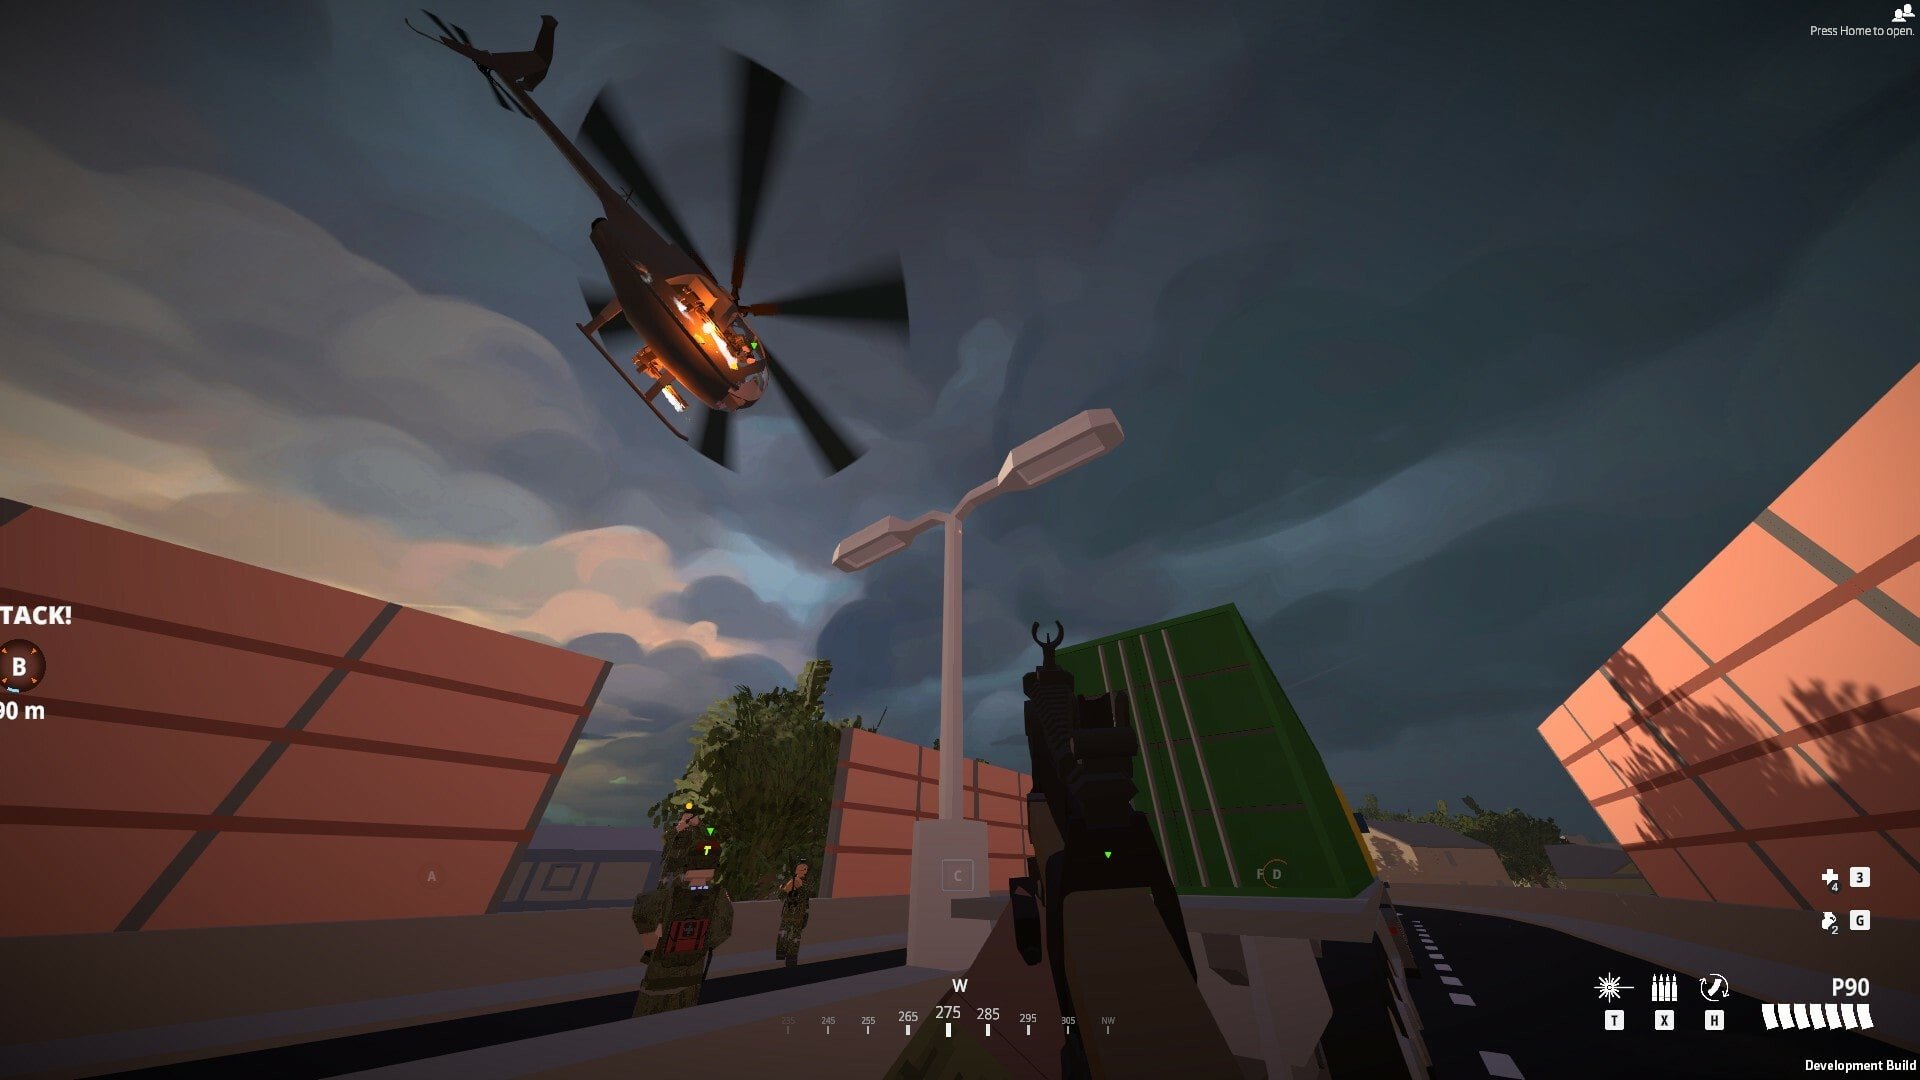 battlebit remastered squad observes air support from bridge during firefight